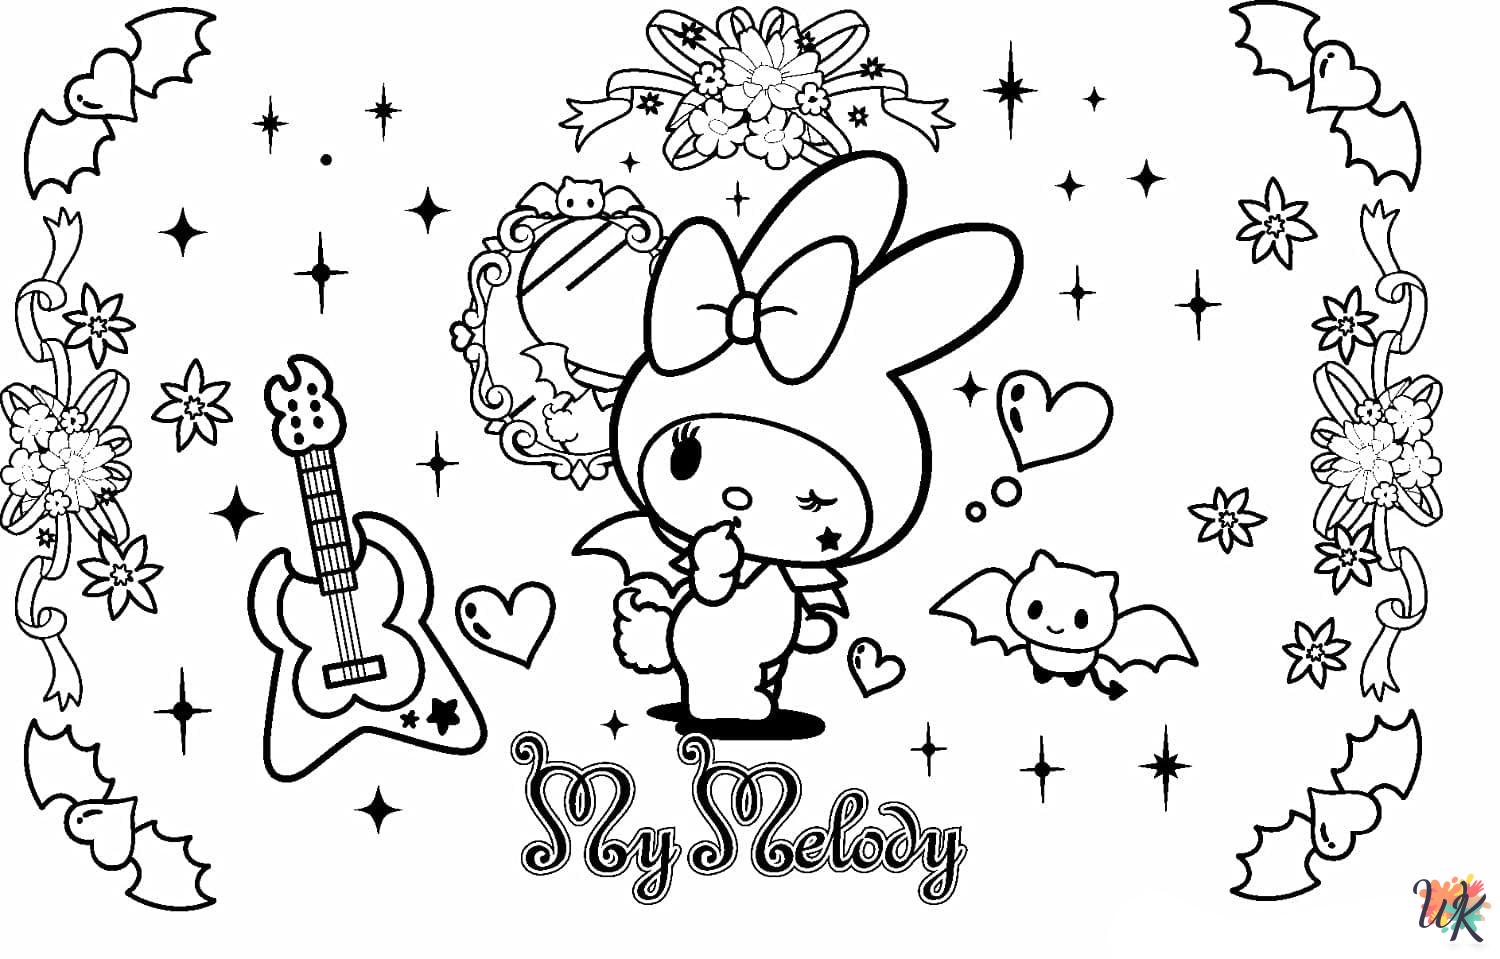 Sanrio coloring pages for adults